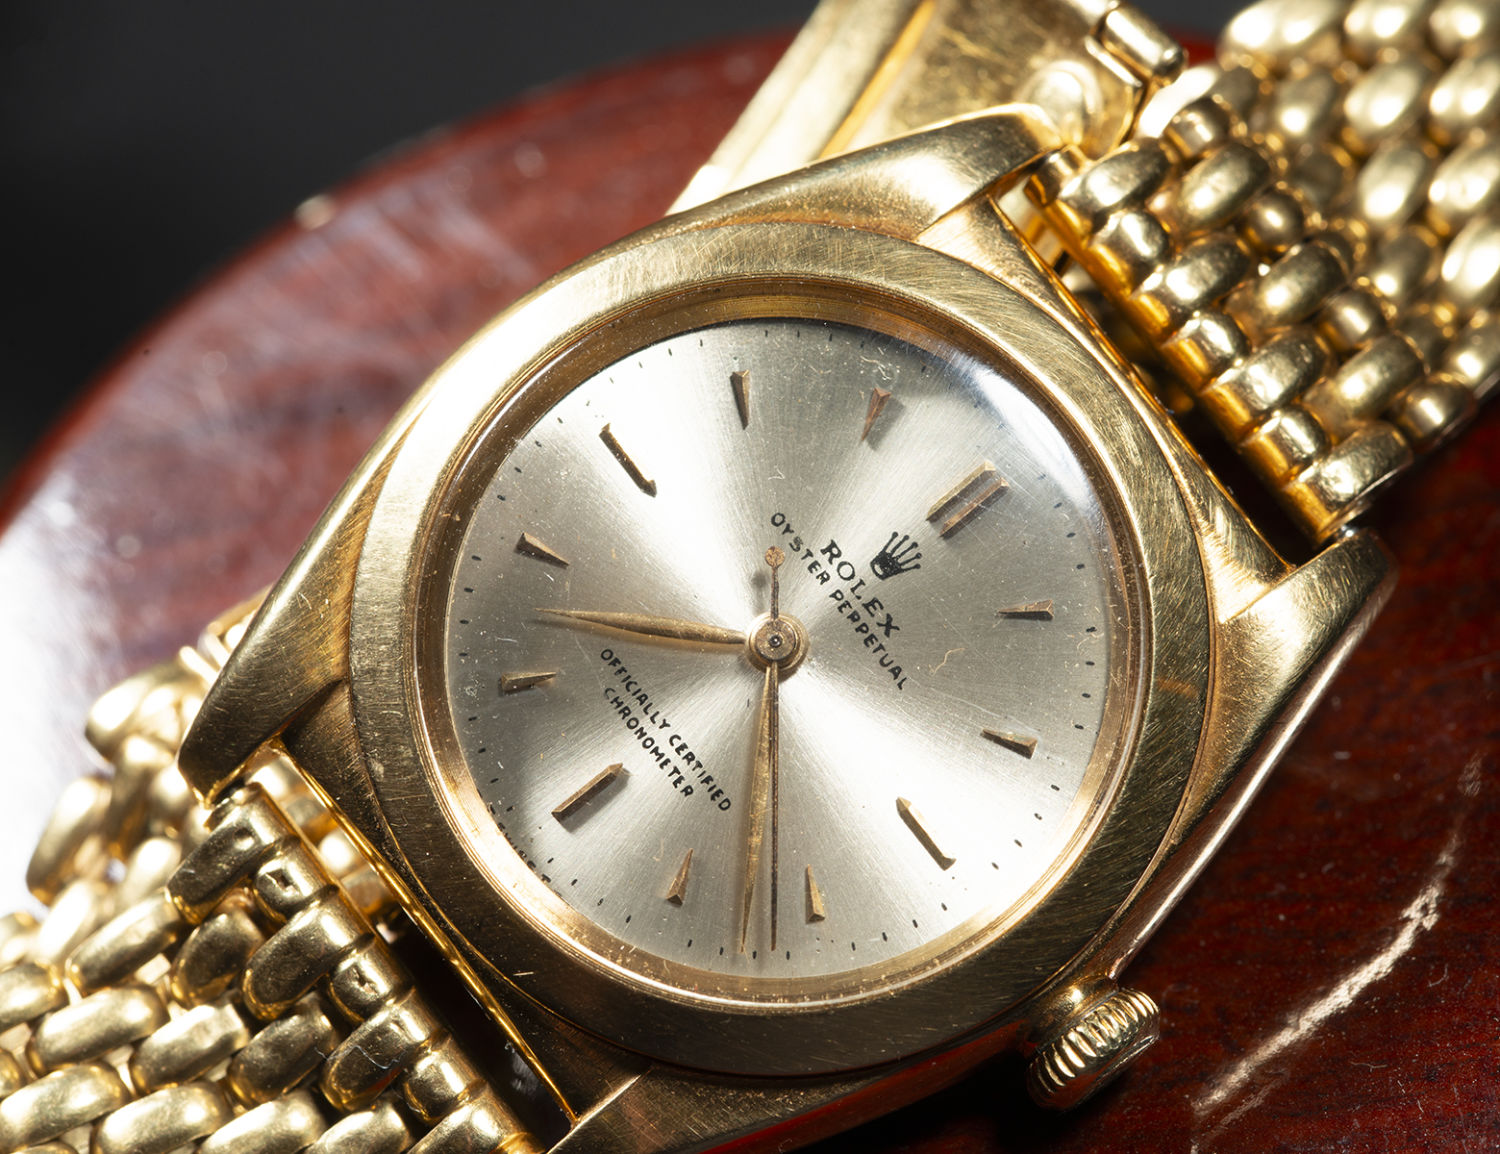 Rolex Oyster in 18k solid gold with complimentary 18k gold jubilee bracelet, model Oyster Perpetual - Image 2 of 5